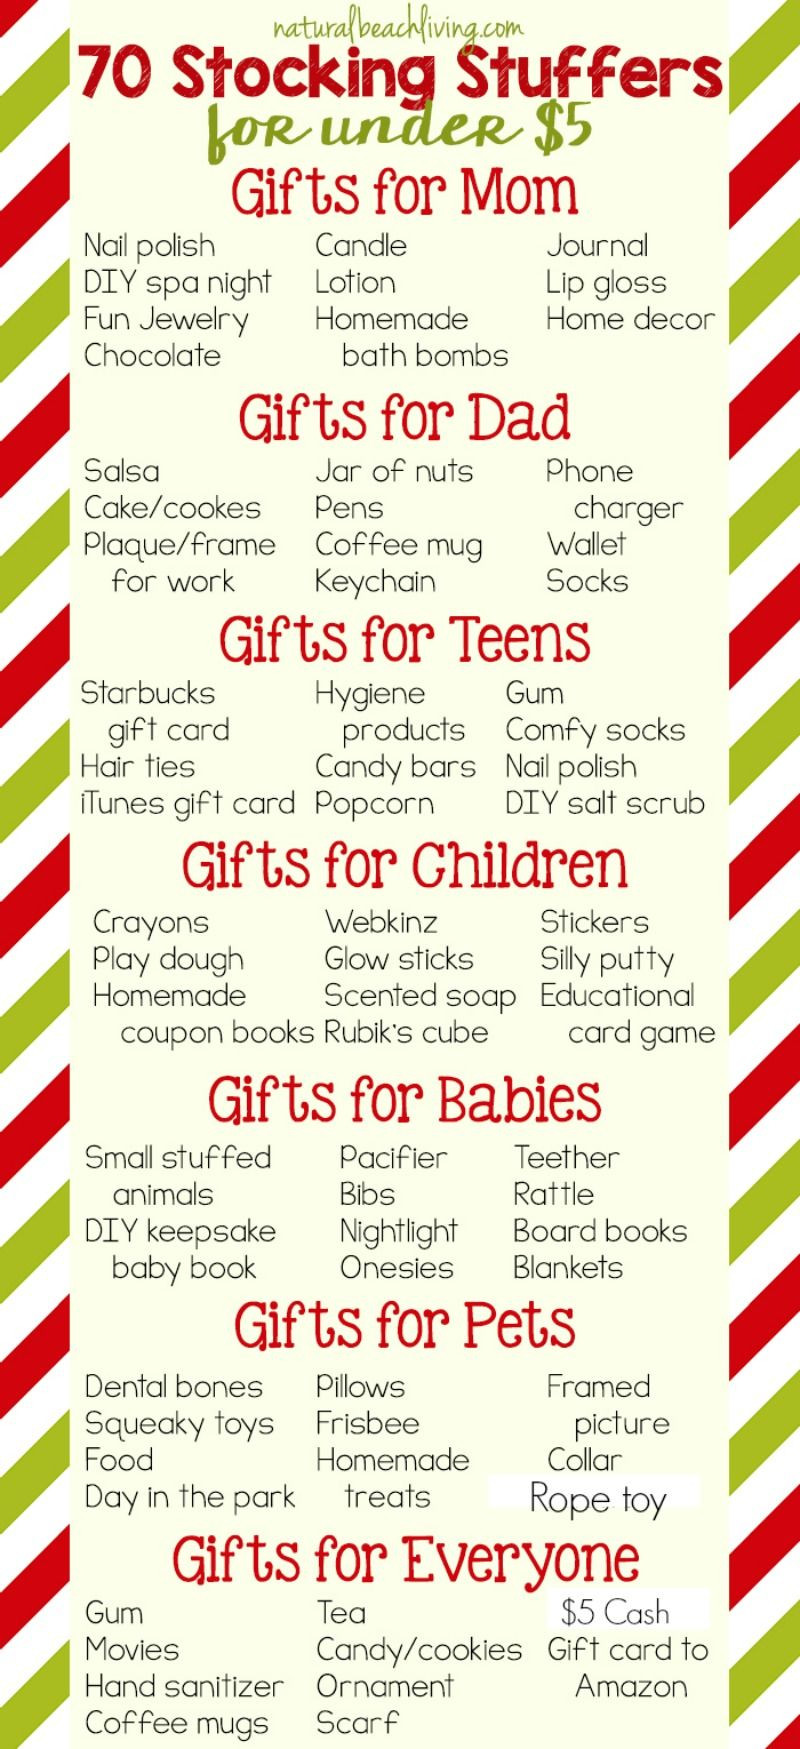 Christmas Stocking Gift Ideas
 80 Super Stocking Stuffers for Under $5